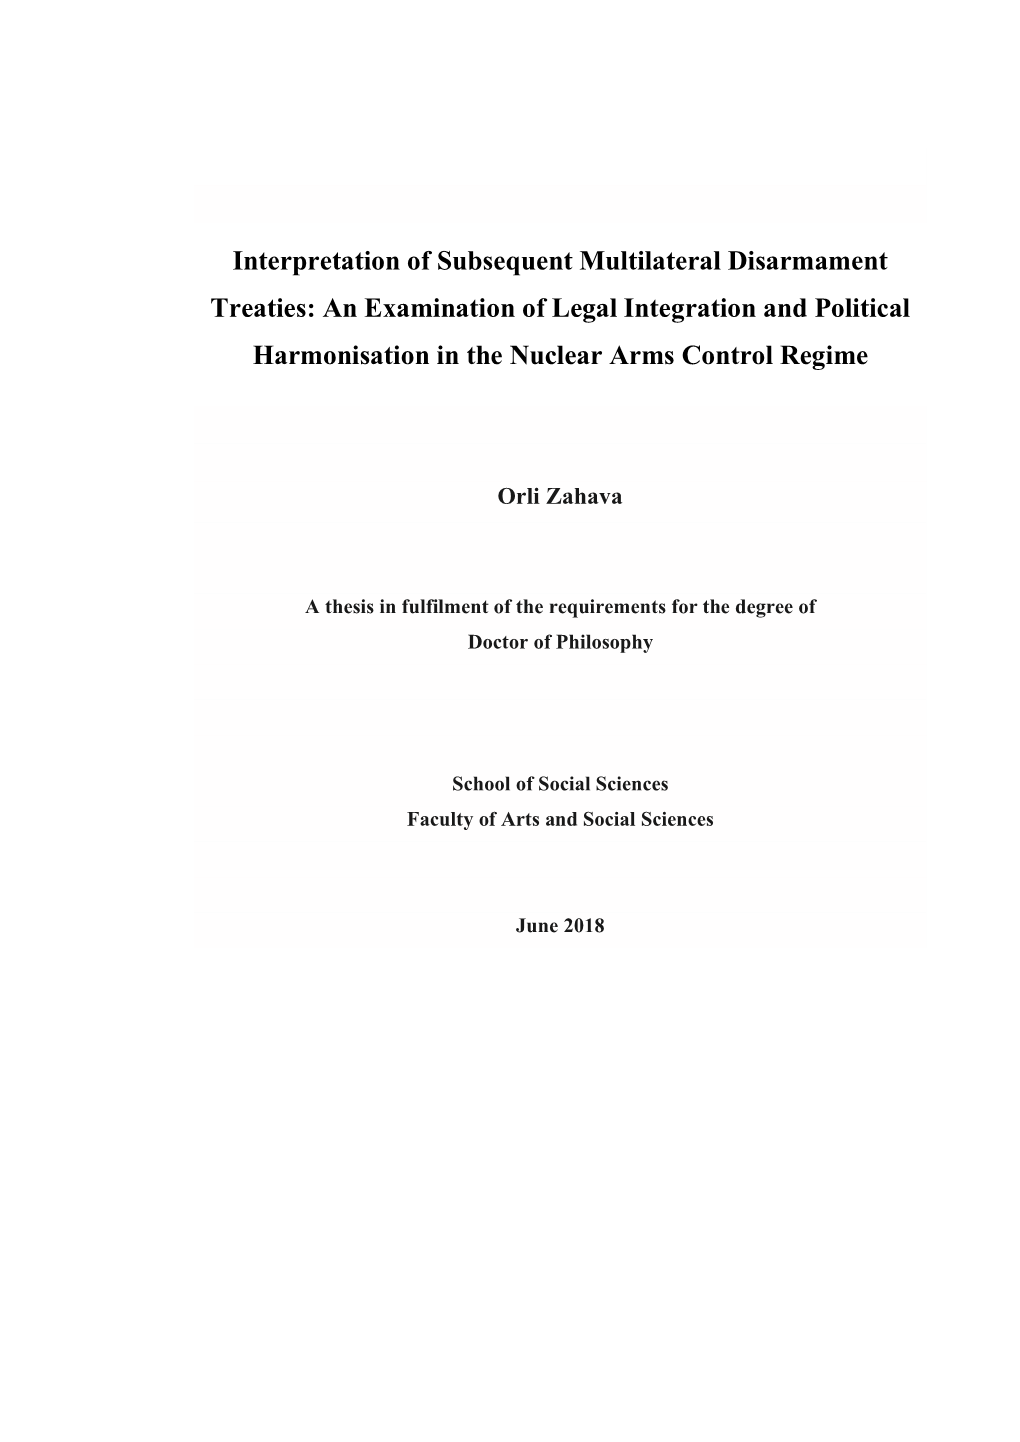 Interpretation of Subsequent Multilateral Disarmament Treaties: an Examination of Legal Integration and Political Harmonisation in the Nuclear Arms Control Regime